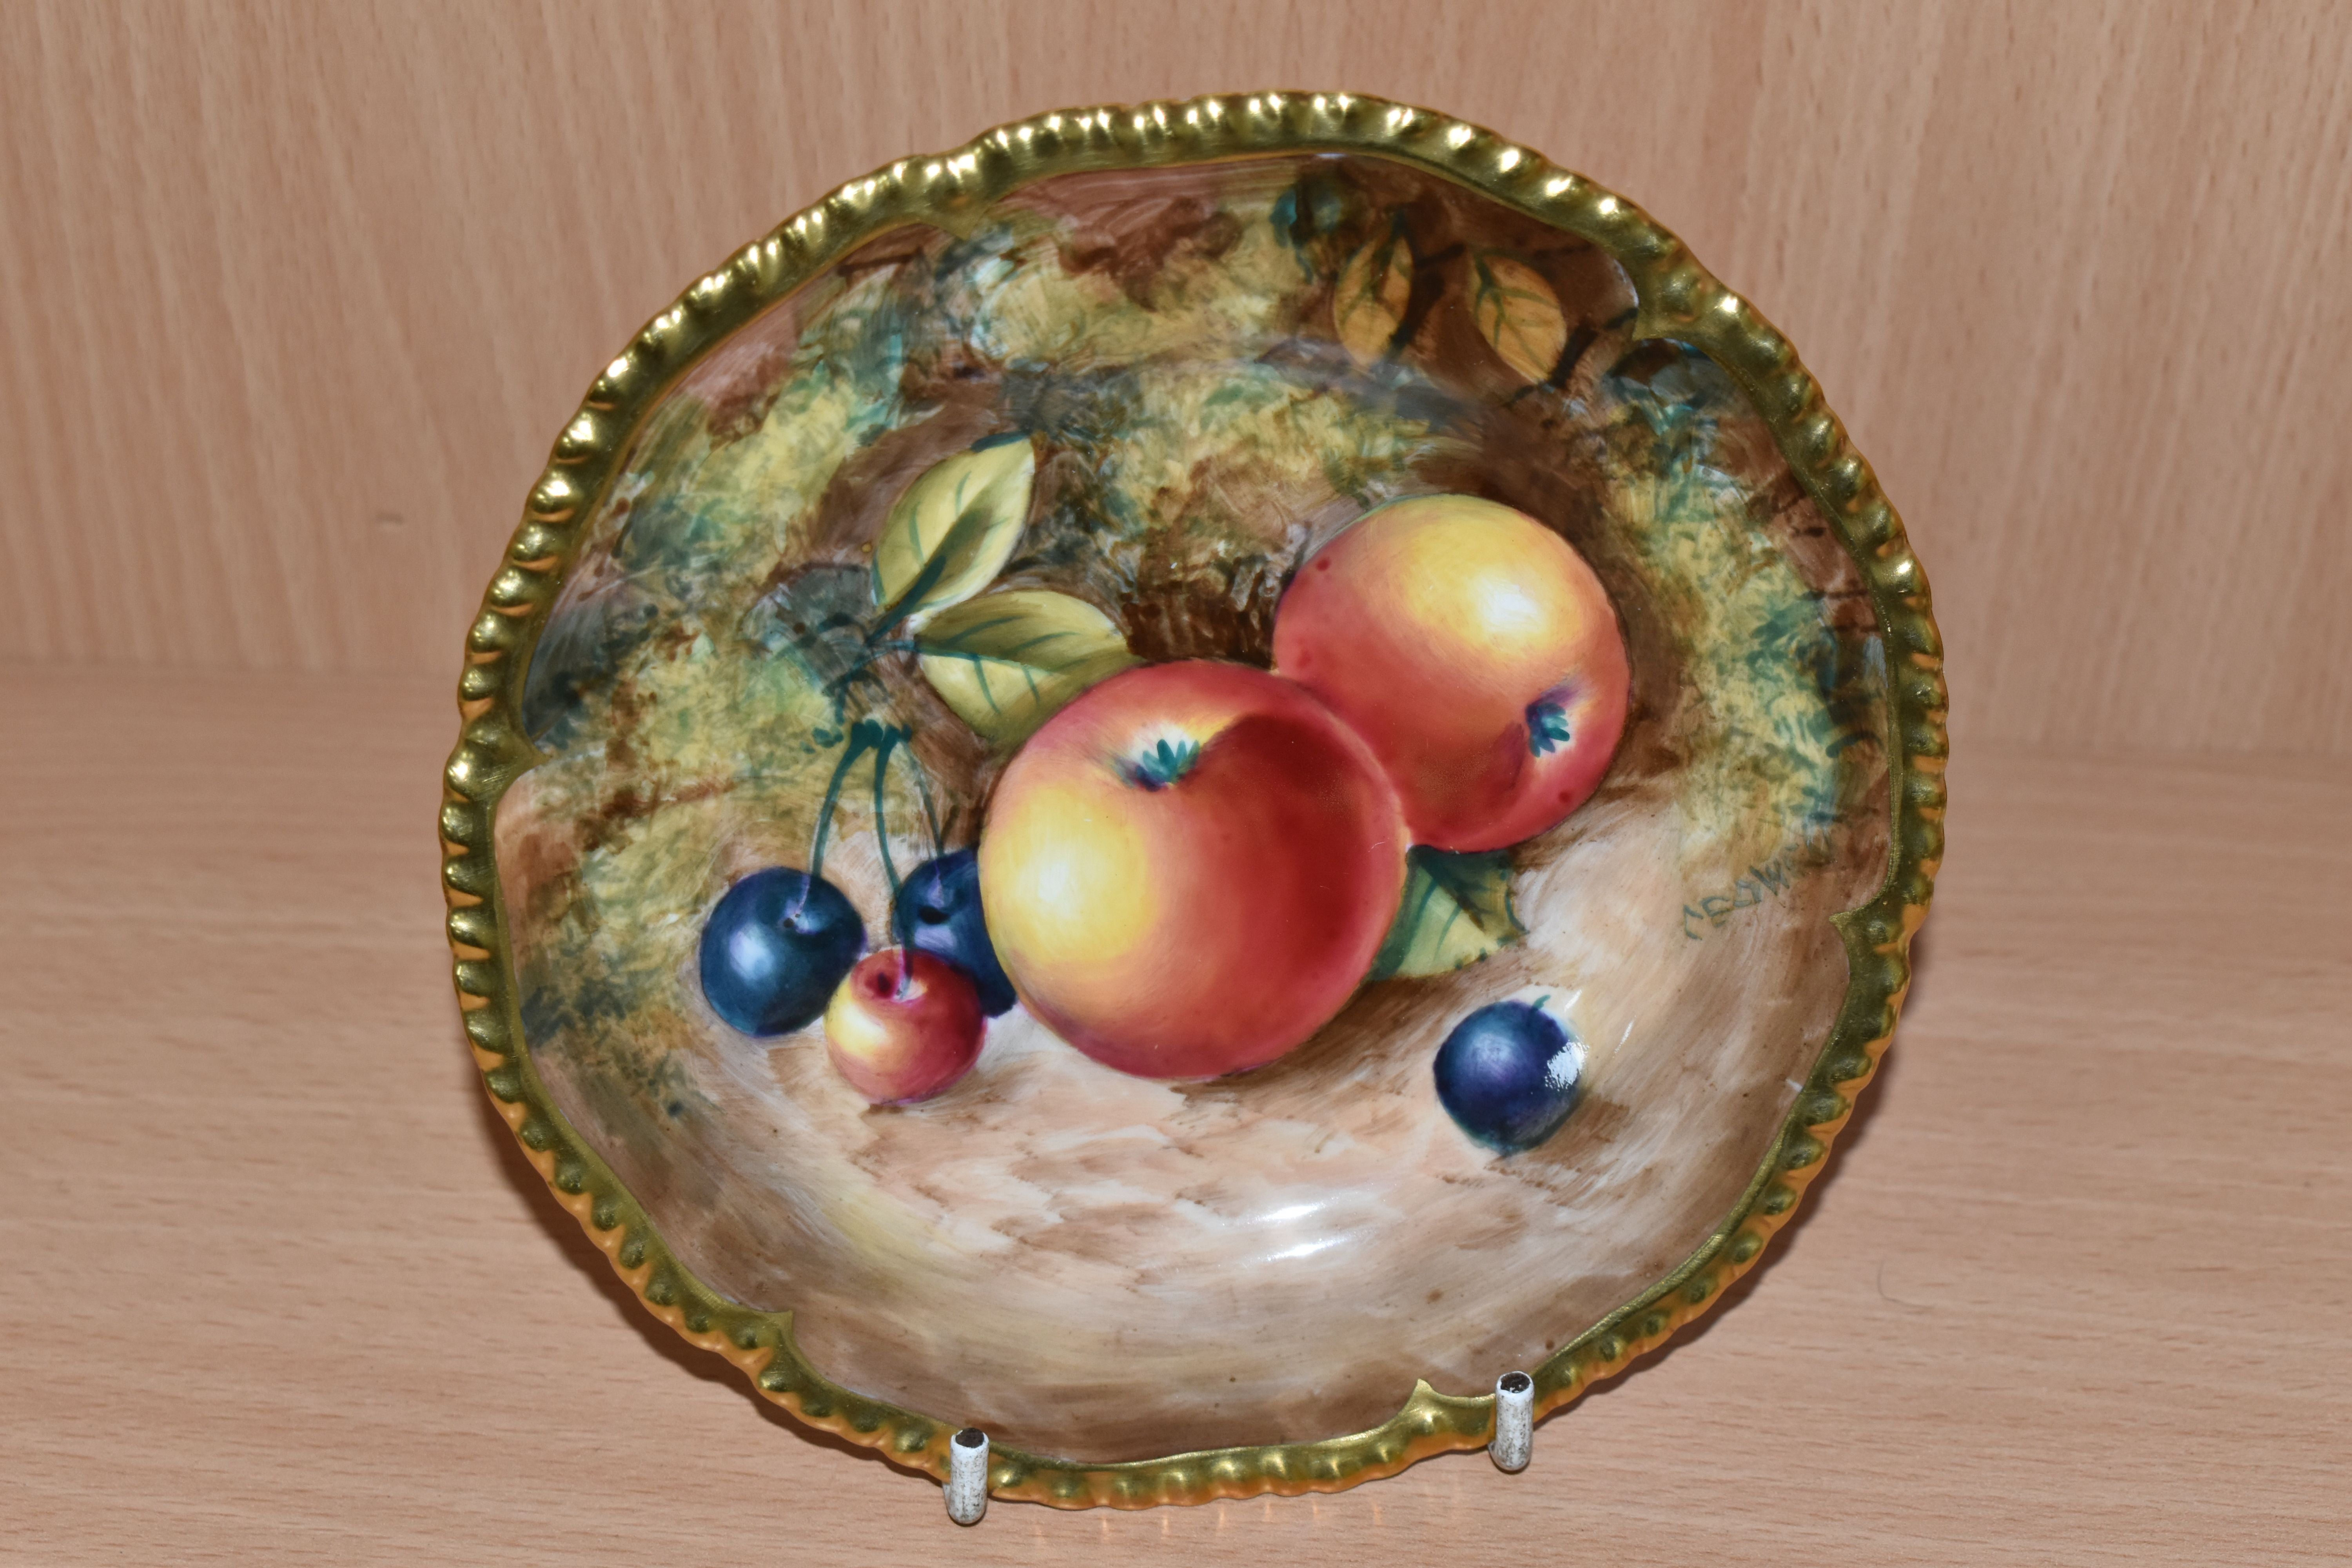 A ROYAL WORCESTER FALLEN FRUIT HAND PAINTED TEA PLATE, painted with fallen apples and cherries on